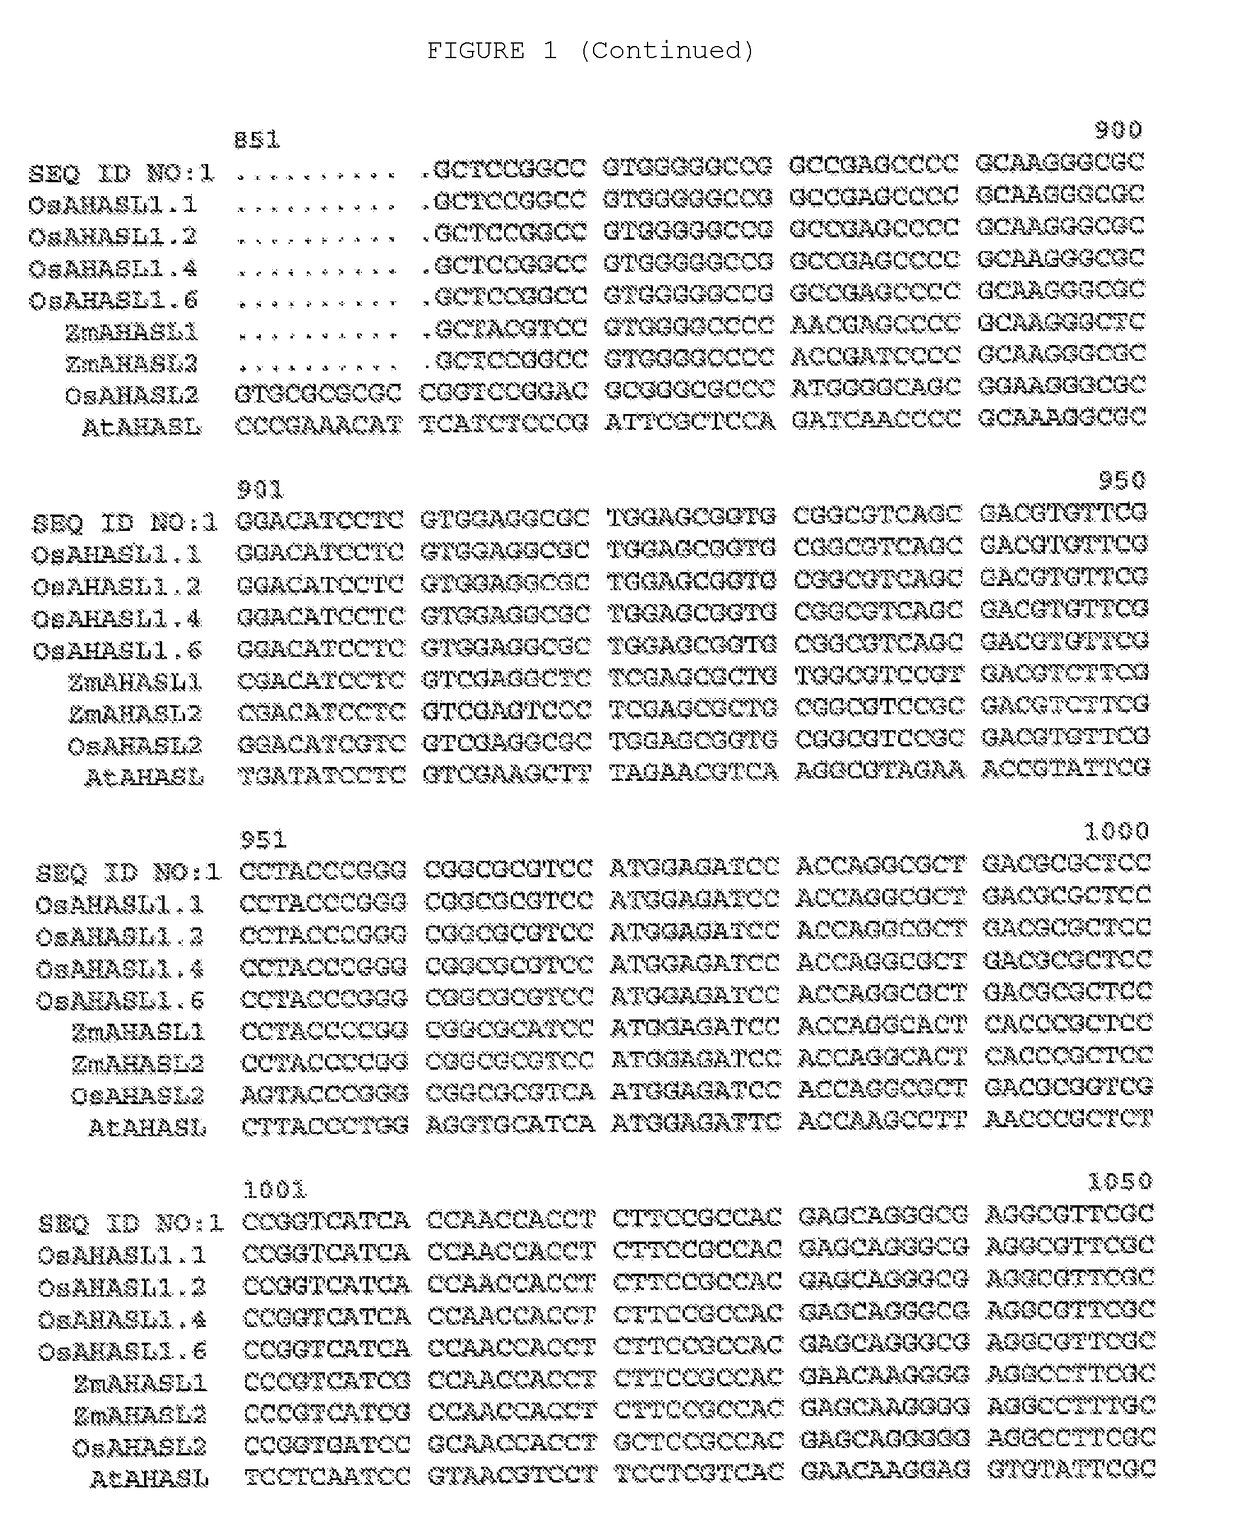 Herbicide-resistant rice plants, polynucleotides encoding herbicide-resistant acetohydroxyacid synthase large subunit proteins, and methods of use